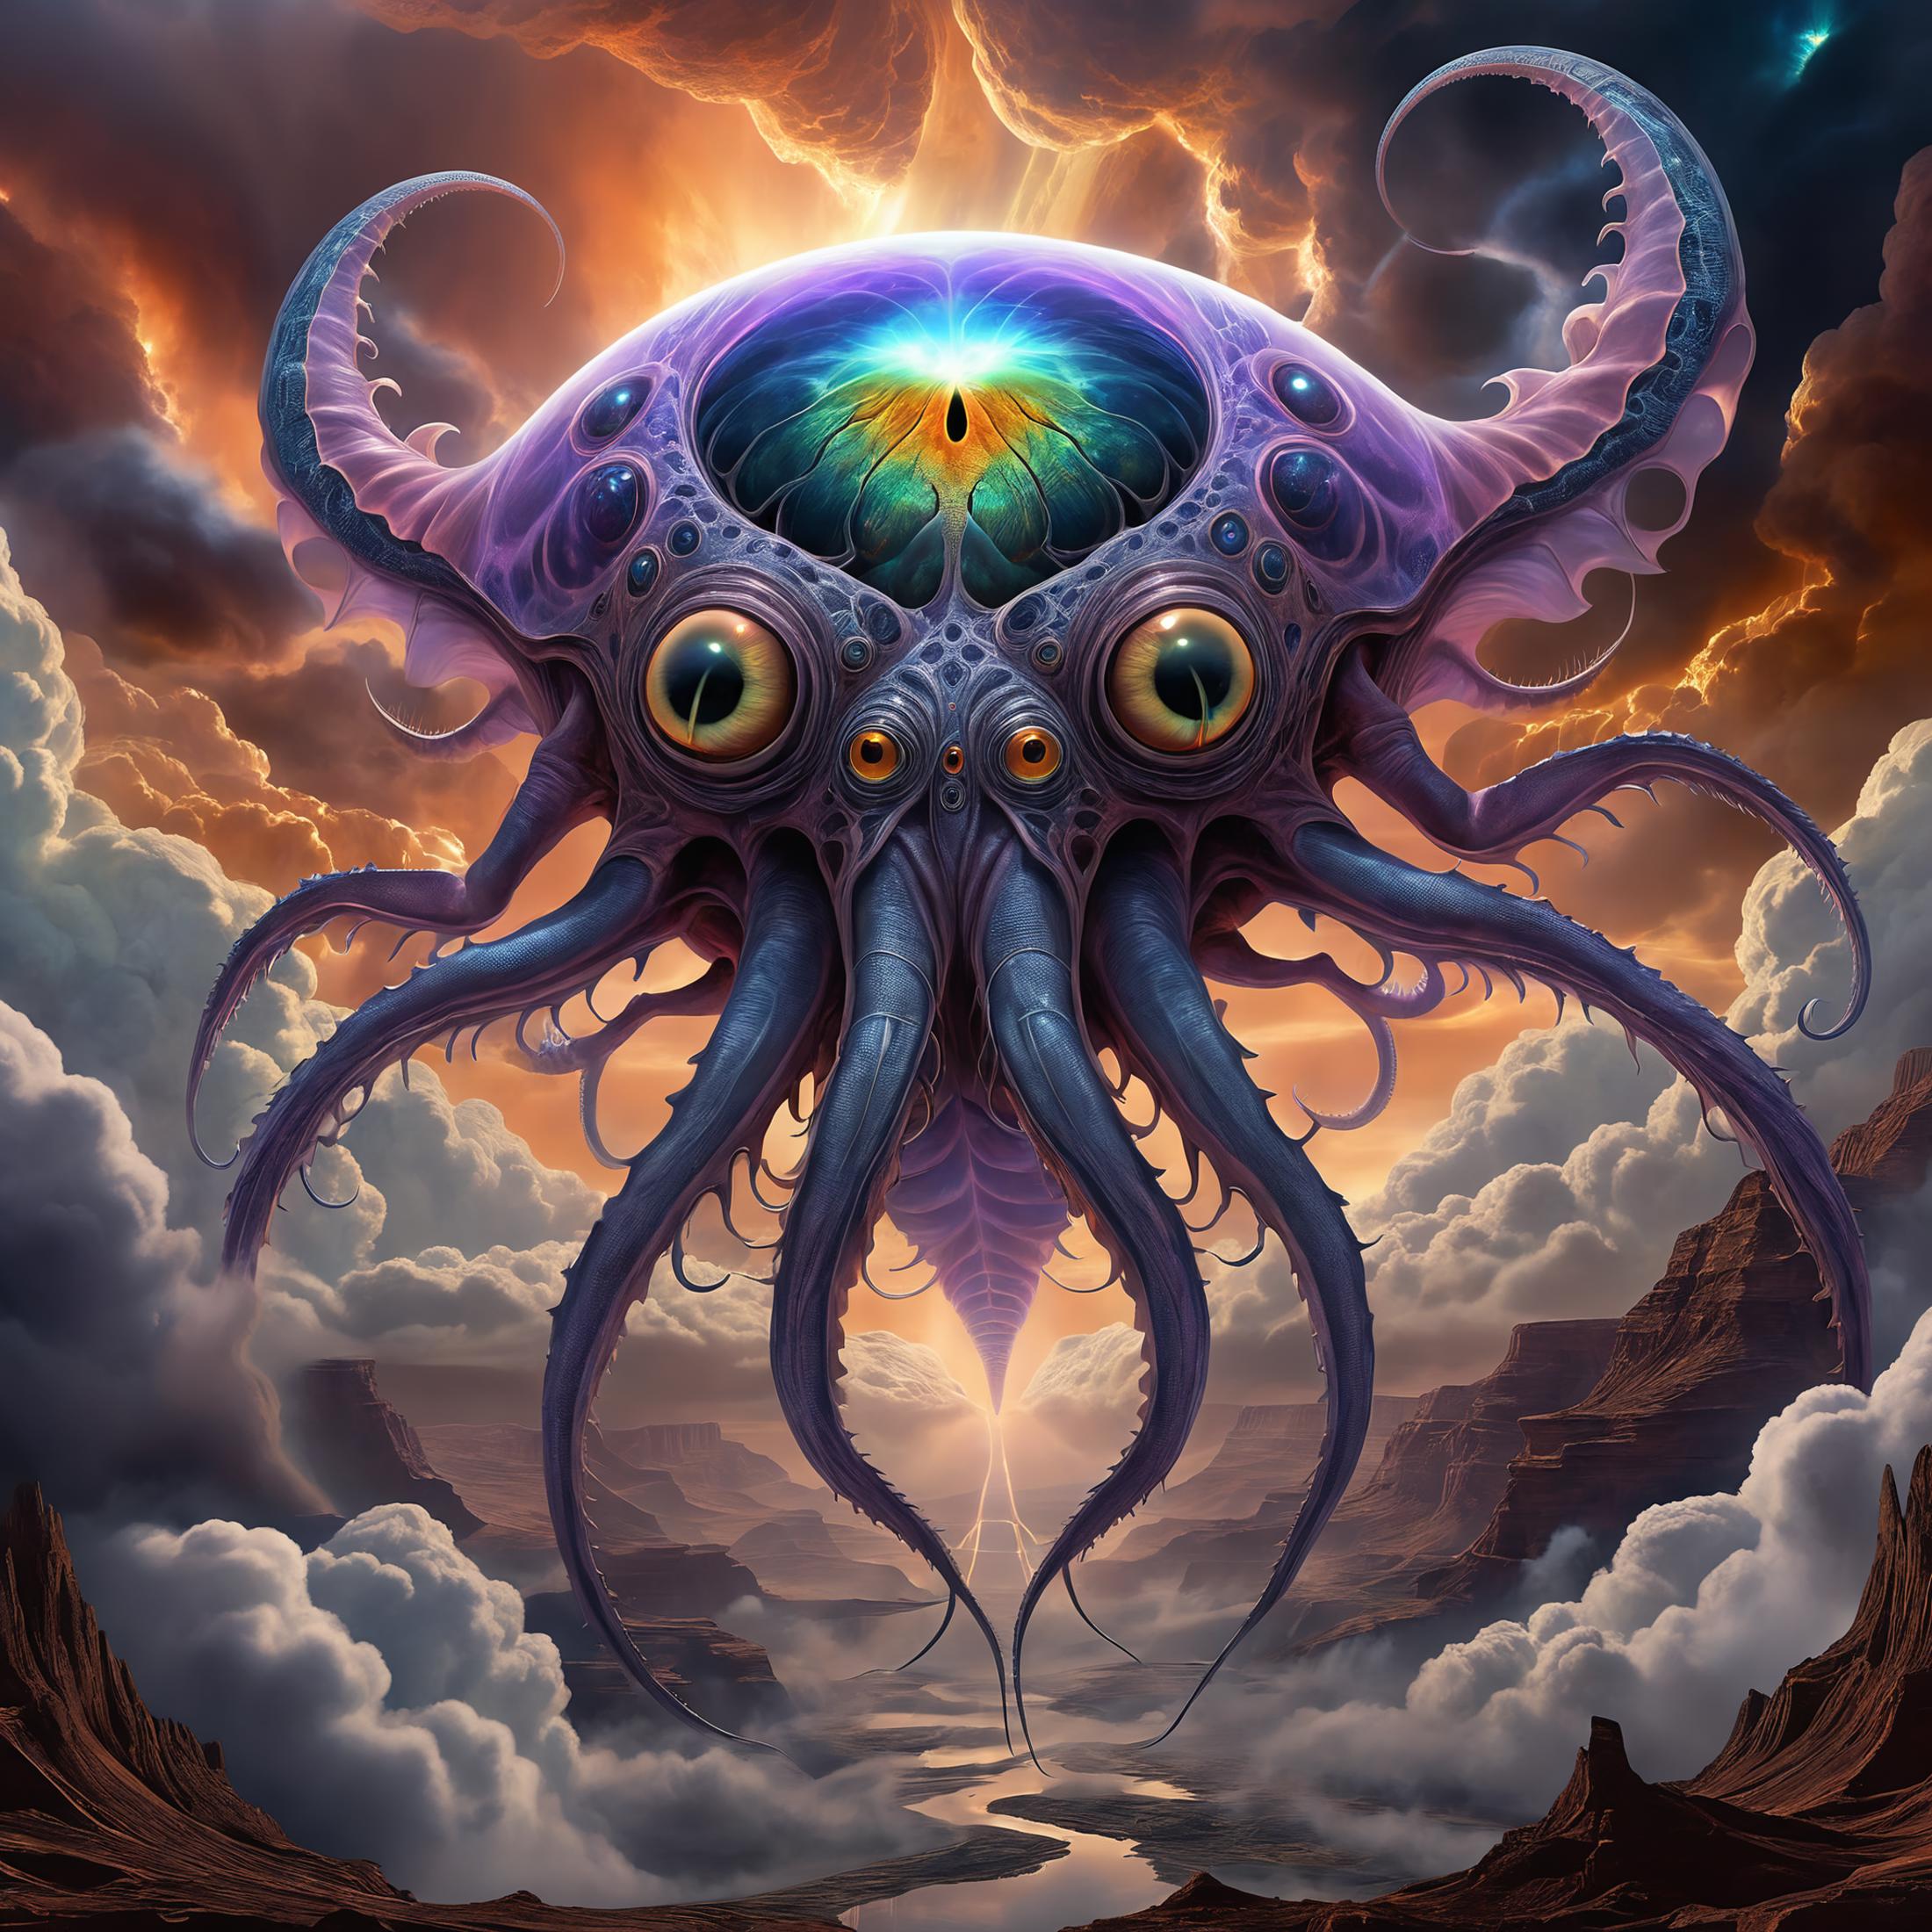 A surreal painting of a giant purple octopus with multiple eyes, surrounded by clouds and mountains.